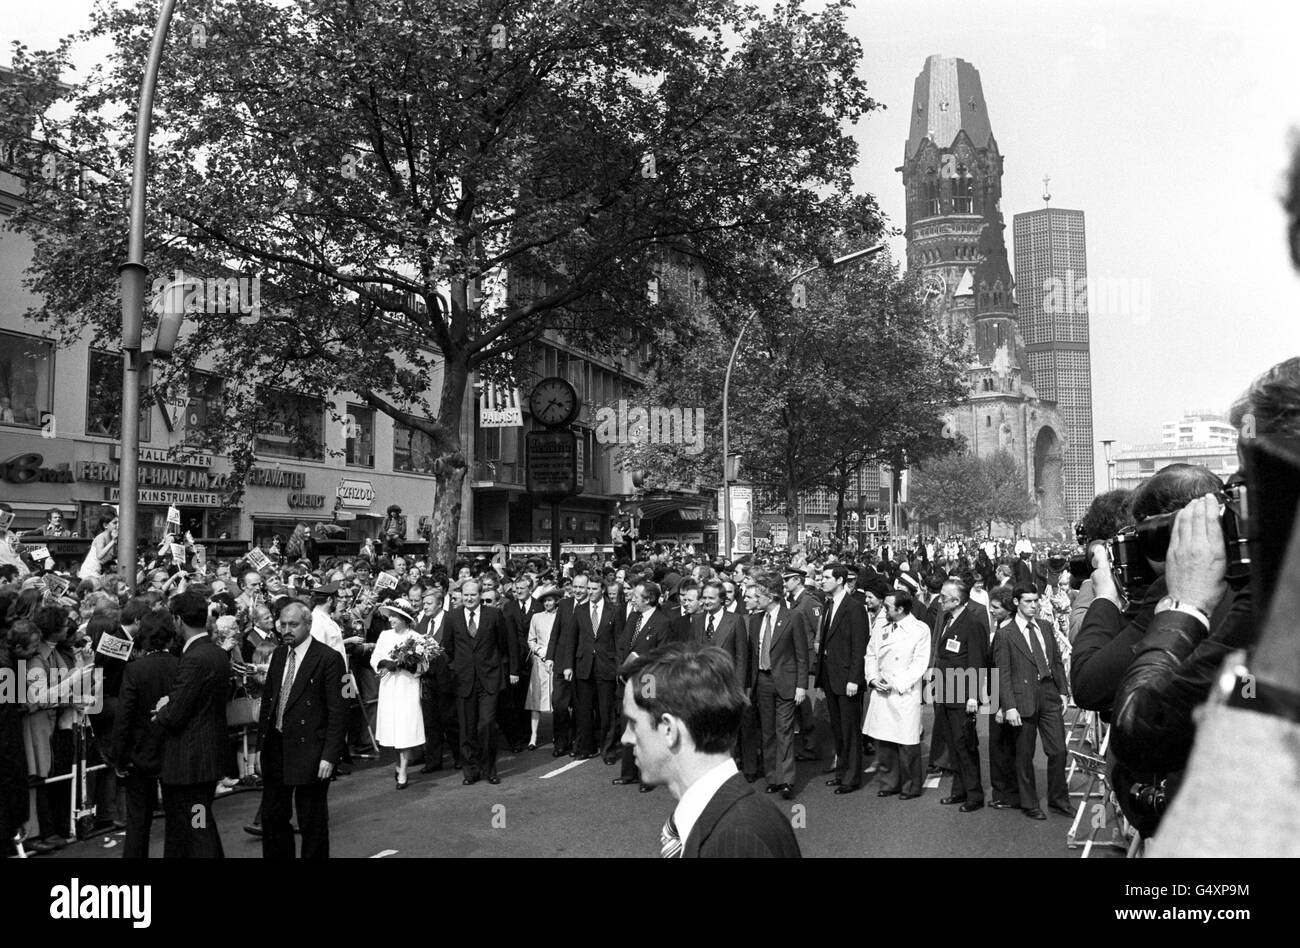 Queen Elizabeth II on a walkabout in West Berlin, after she made a speech close to the blitzed Kaiser Wilhelm Memorial Church (behind), during her State visit to West Germany. Stock Photo